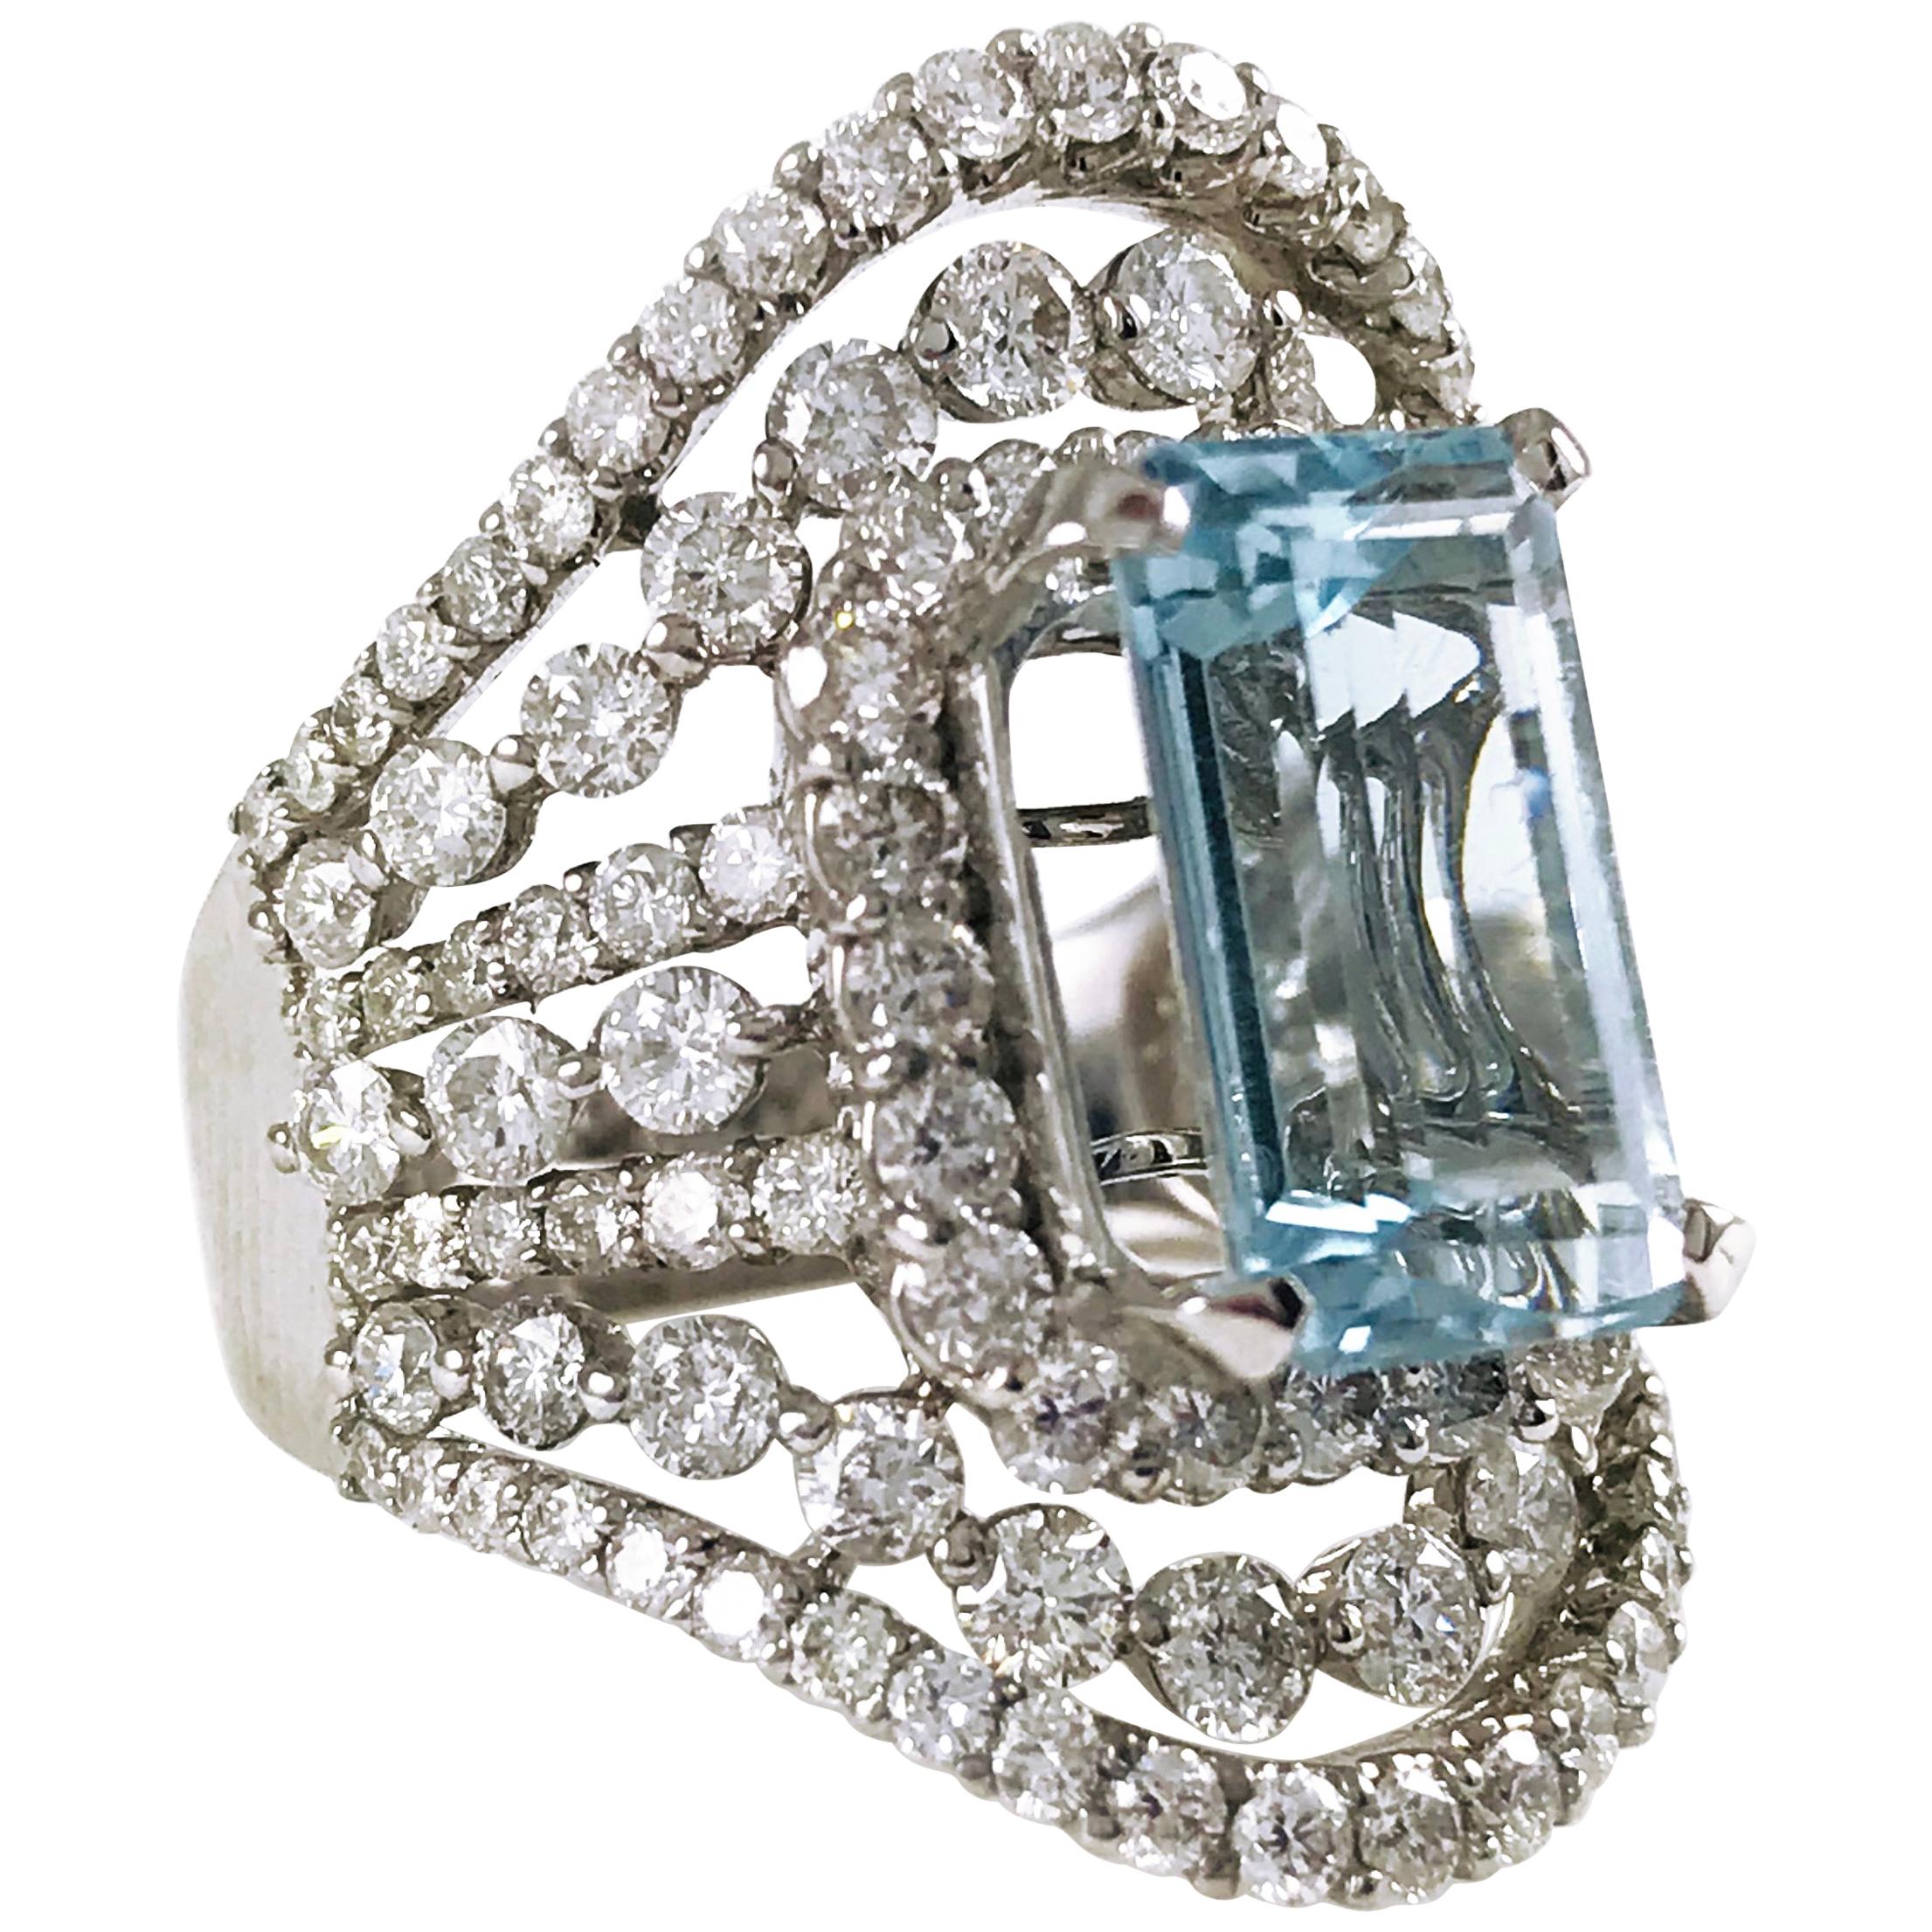 Step-Cut Aquamarine Cocktail Ring, 6.5 Carats For Sale